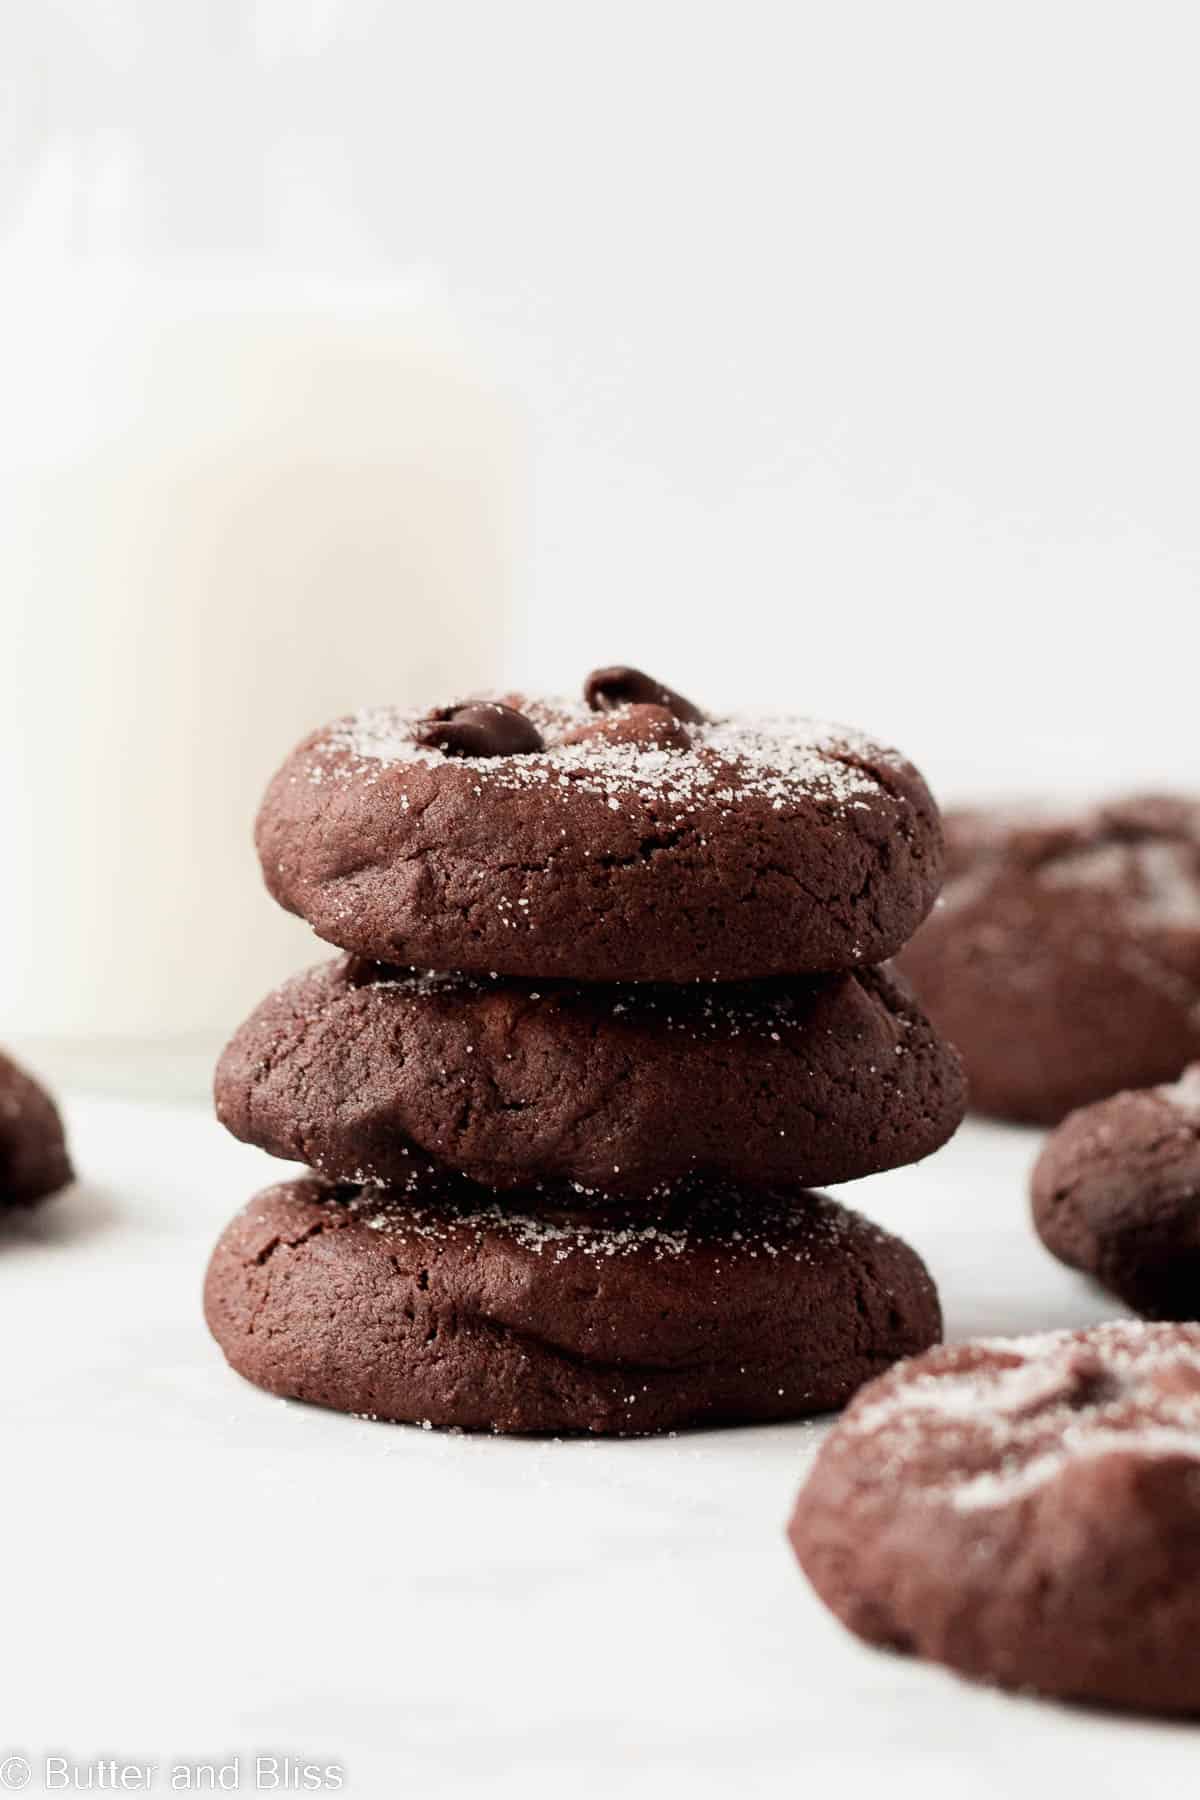 A small stack of double chocolate cookies set on a table next to a glass of milk.